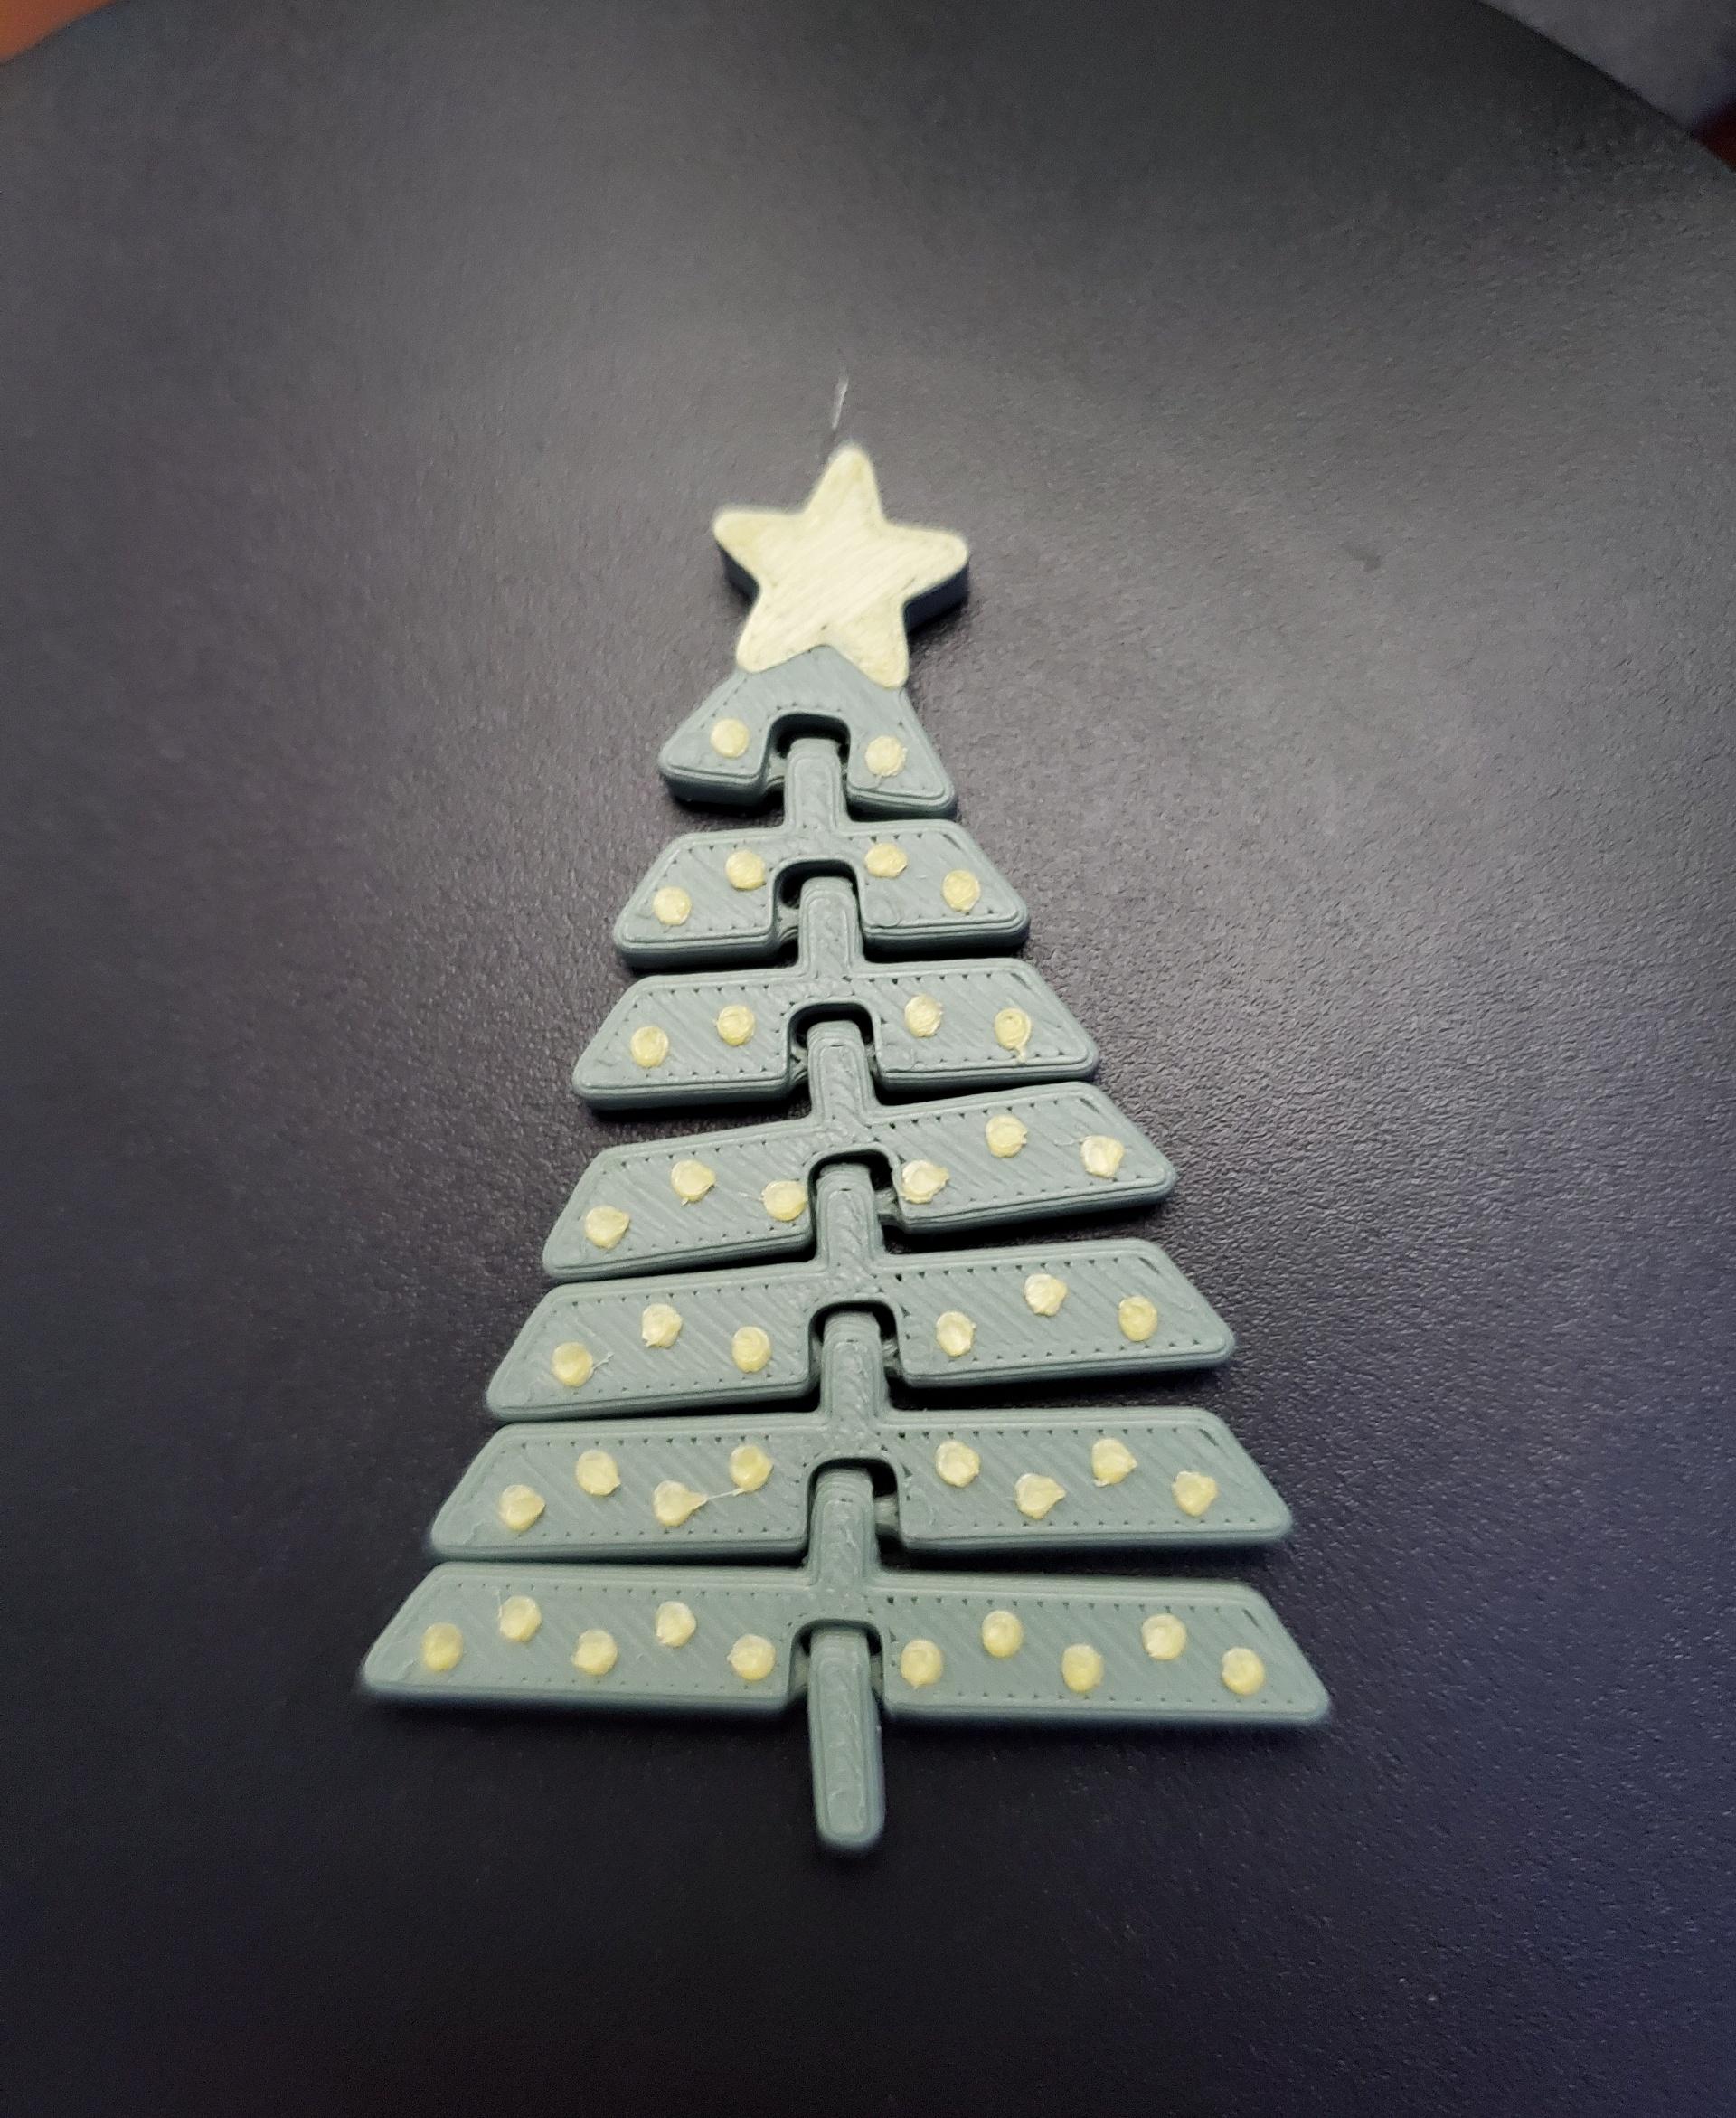 Articulated Christmas Tree with Star and Ornaments - Print in place fidget toys - 3mf - polyterra muted green - 3d model